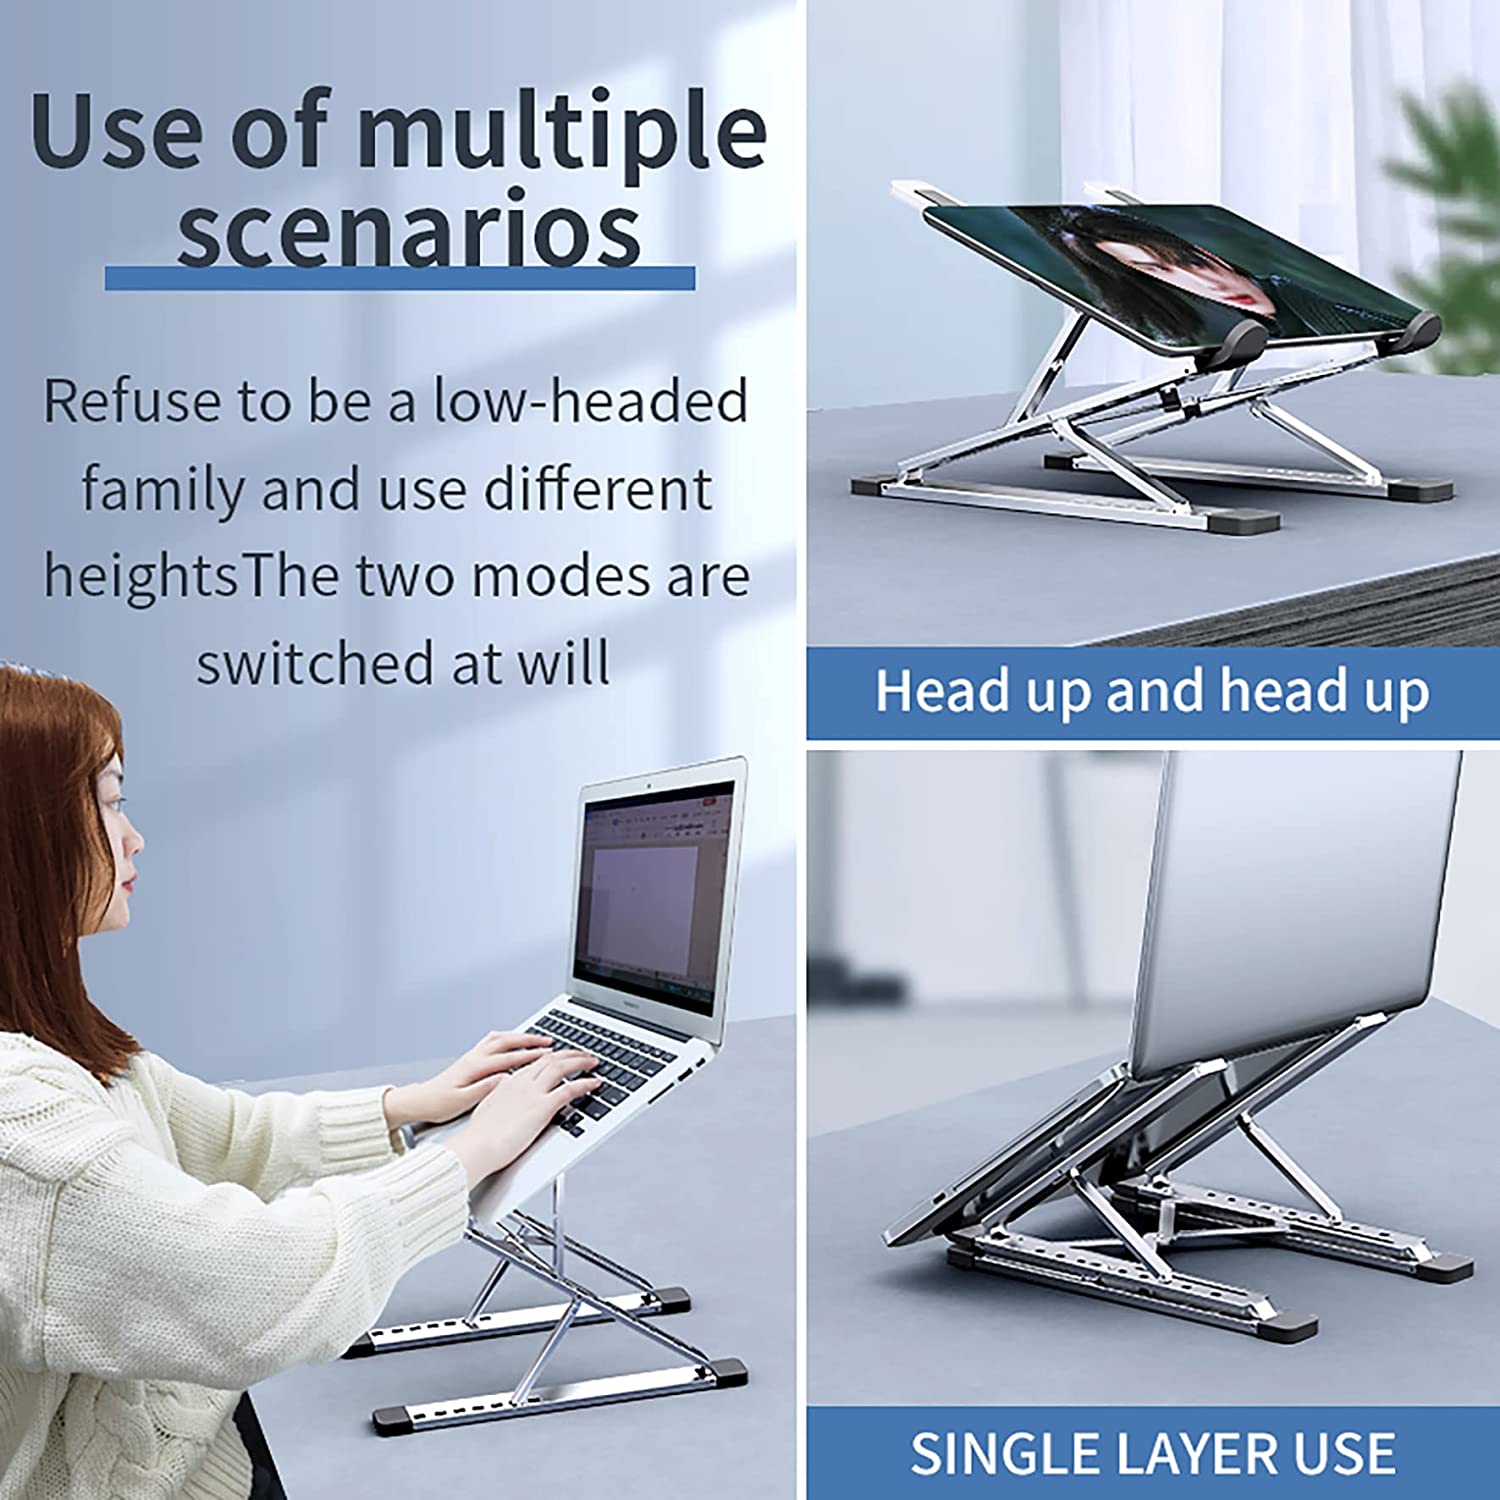 Laptop-Accessories-Portable-Laptop-Stand-Double-Layer-6-9-Levels-Adjustable-Ergonomic-Portable-Aluminum-Lightweight-Folding-Laptop-Stand-for-any-device-14